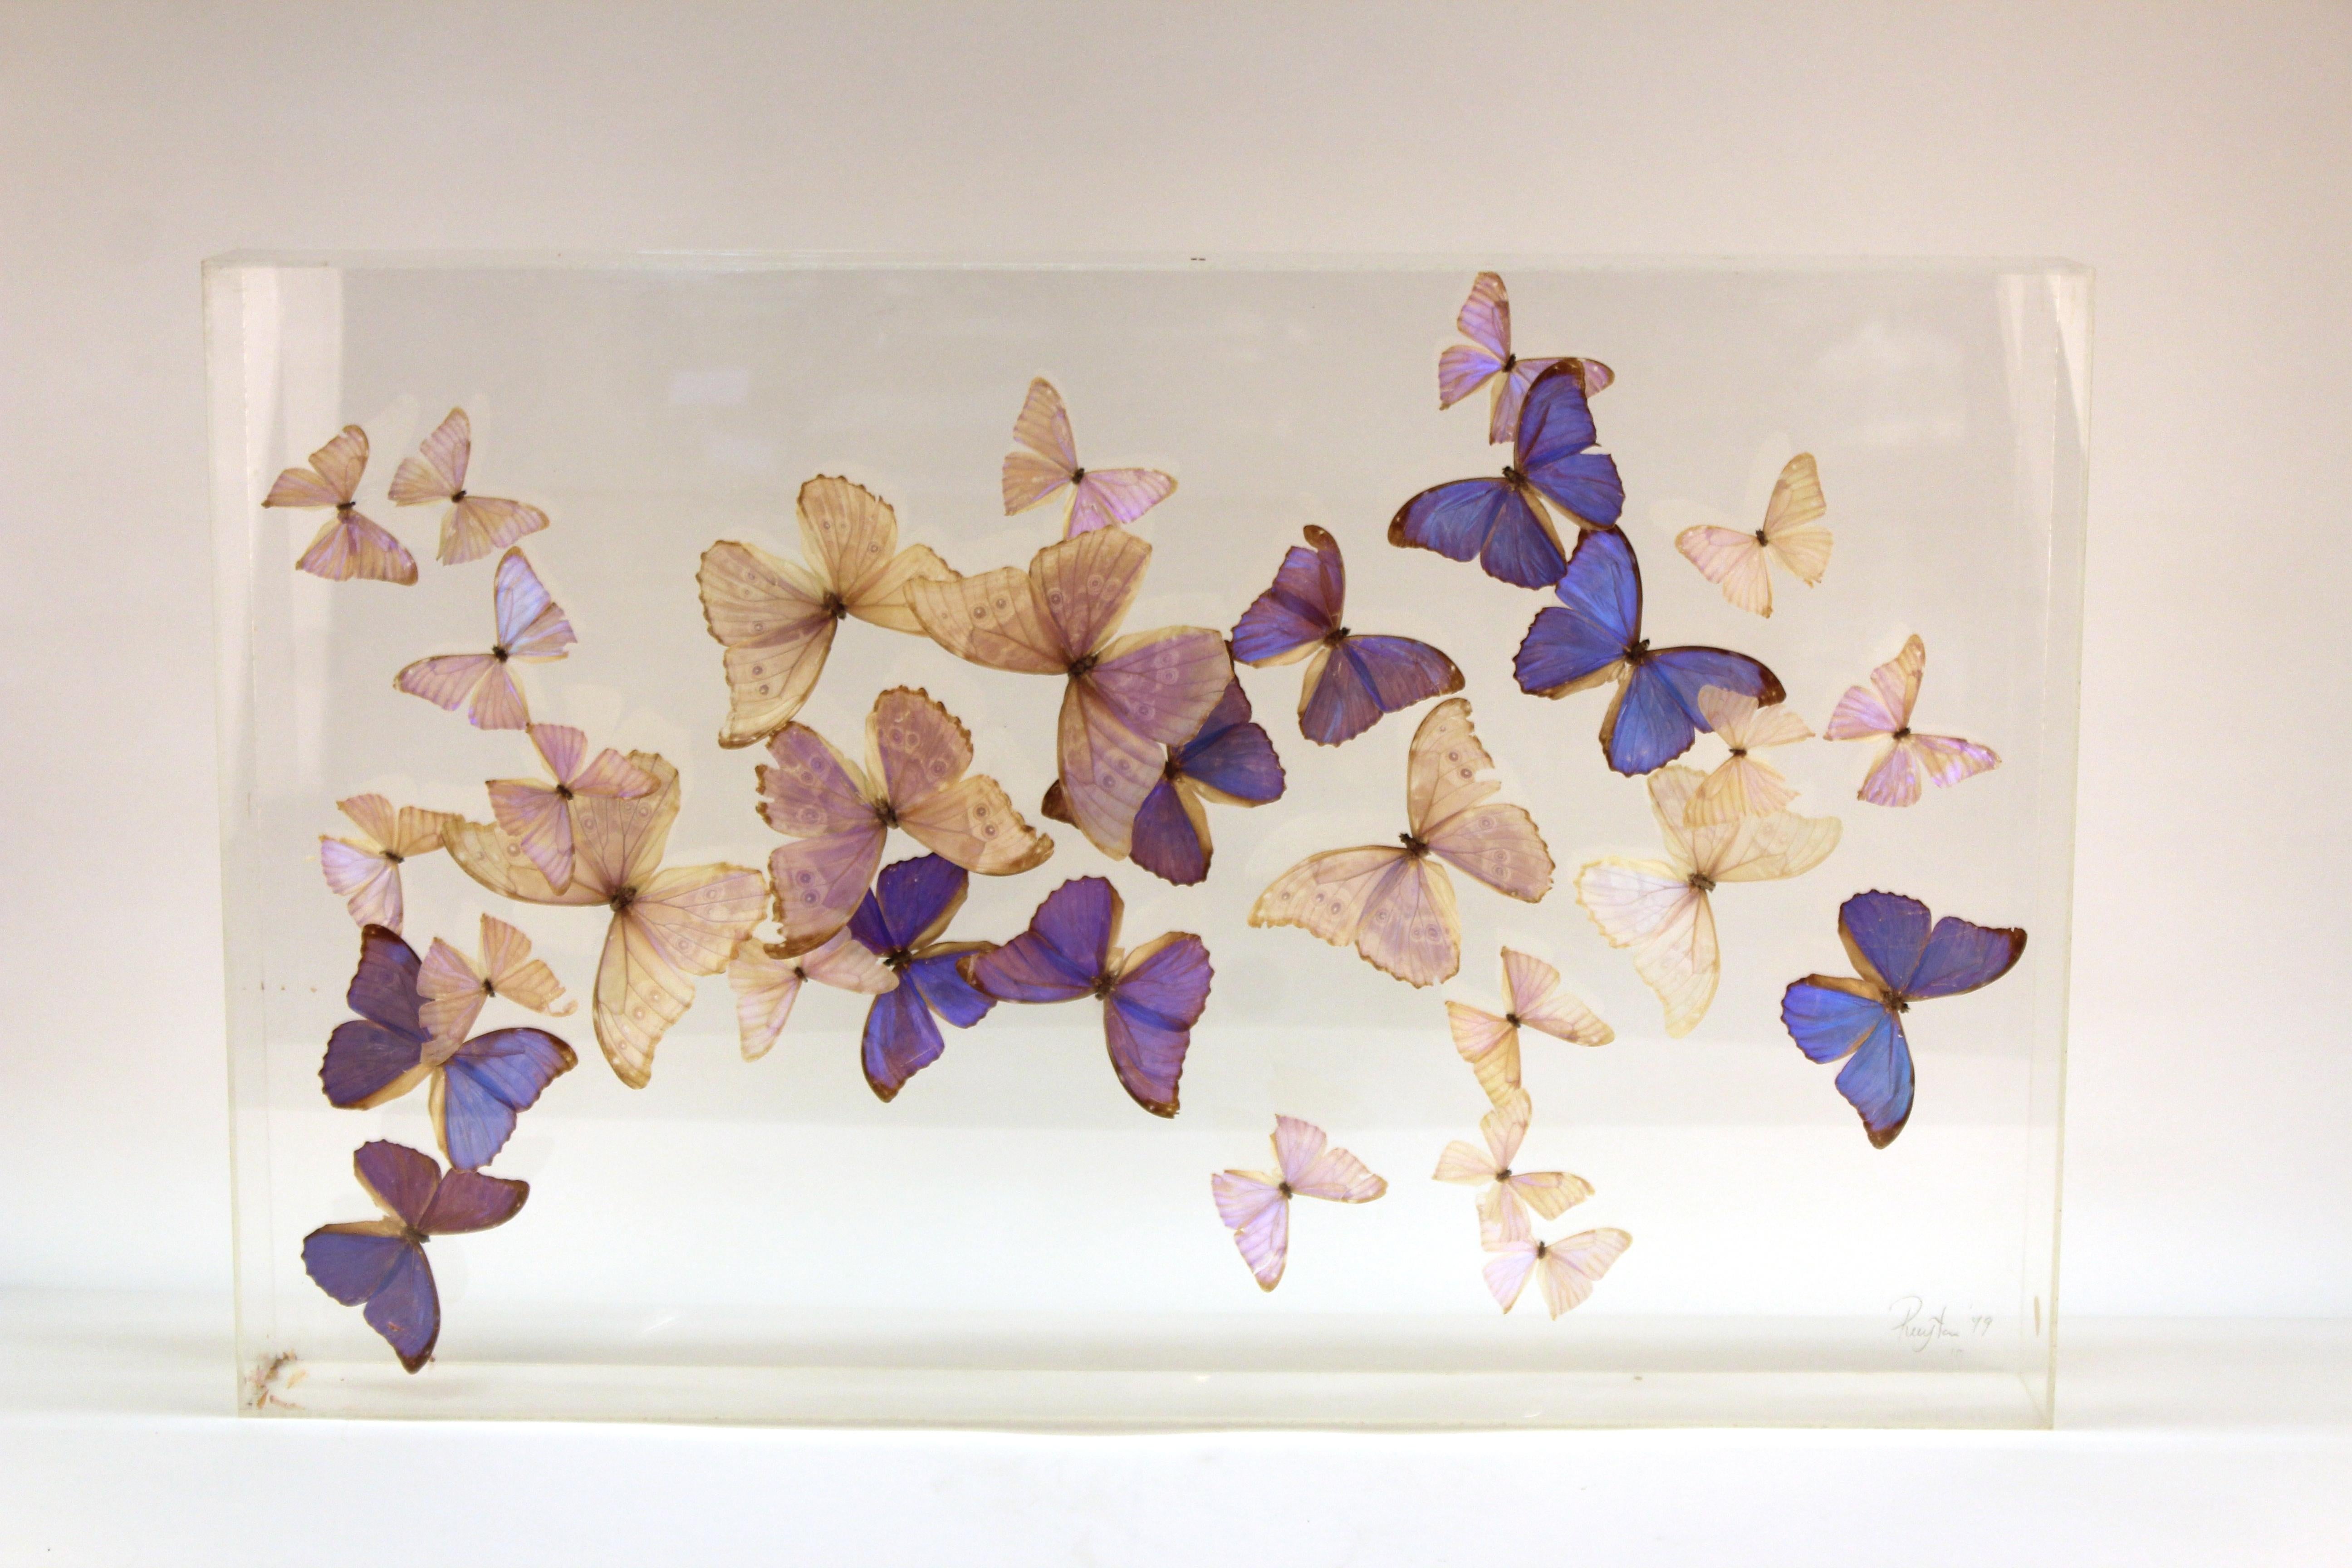 Mid-Century Modern wall art butterflies mounted inside a Lucite case. The piece has a signature and date in the lower right corner (Ruyten 1979) and has two Lucite hooks on the back for easy wall mounting. Likely made in the United States in 1979